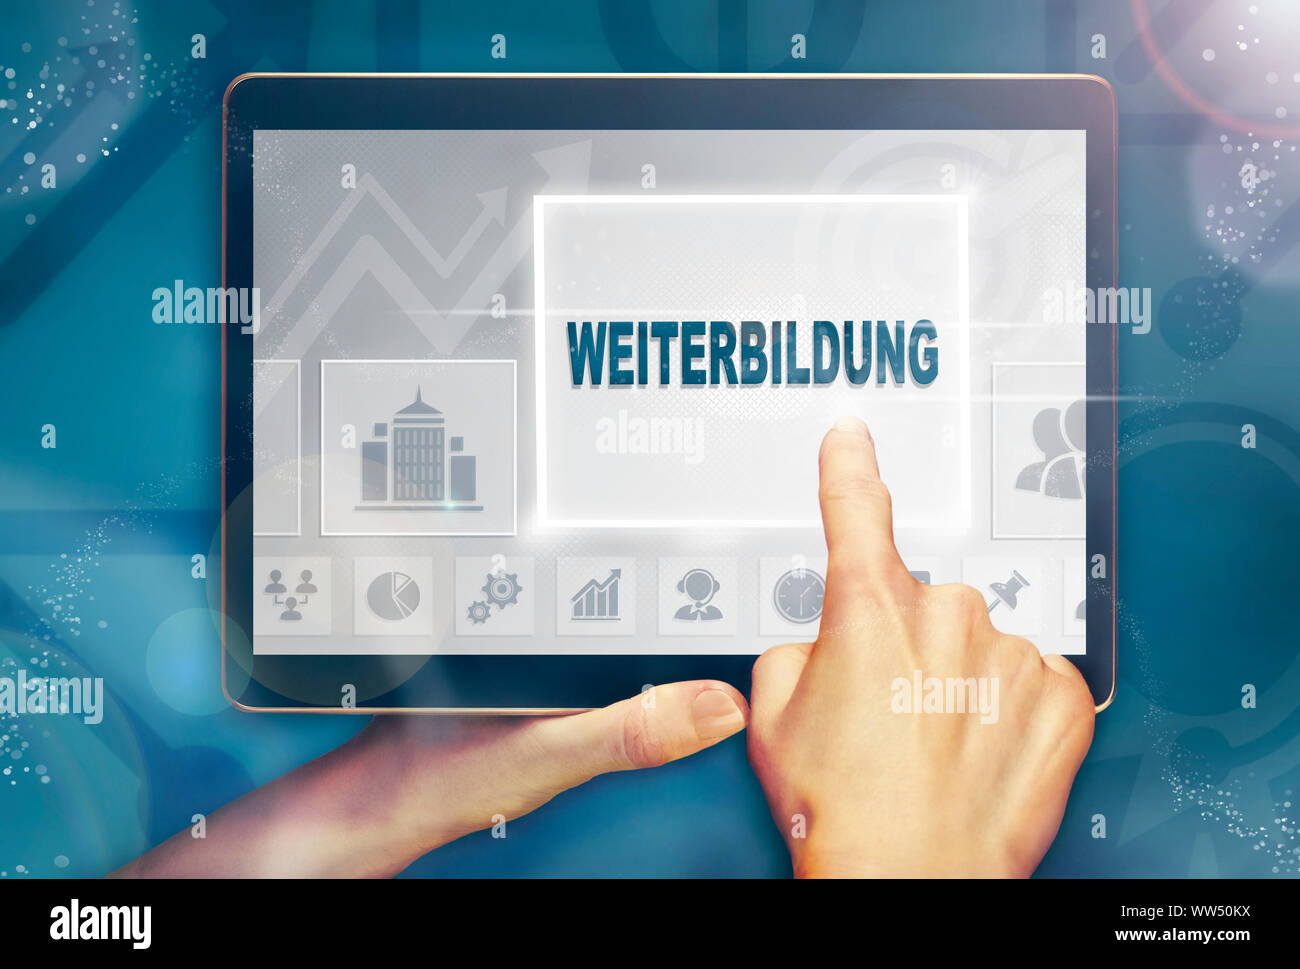 A hand holiding a computer tablet and pressing a Further Education 'Weiterbildung' business concept. Stock Photo